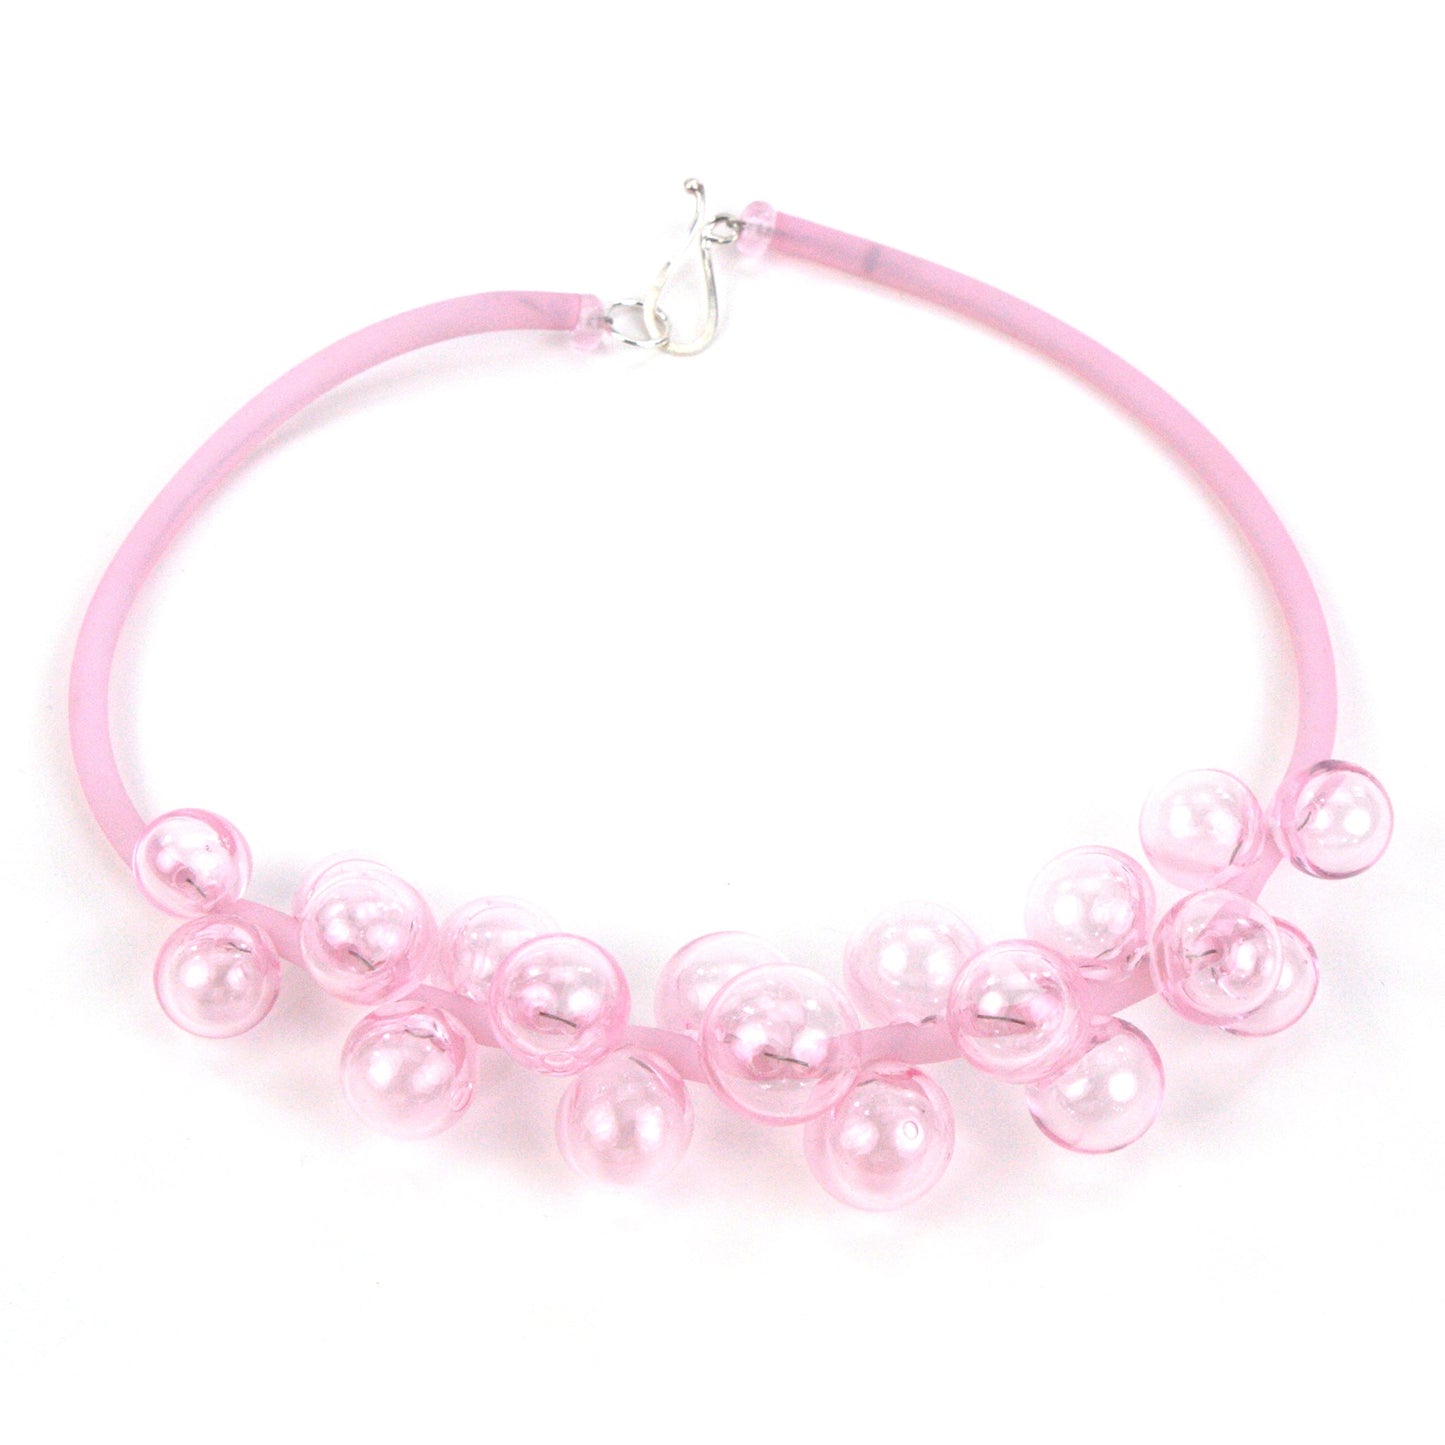 Chroma Bolla Necklace in Pink